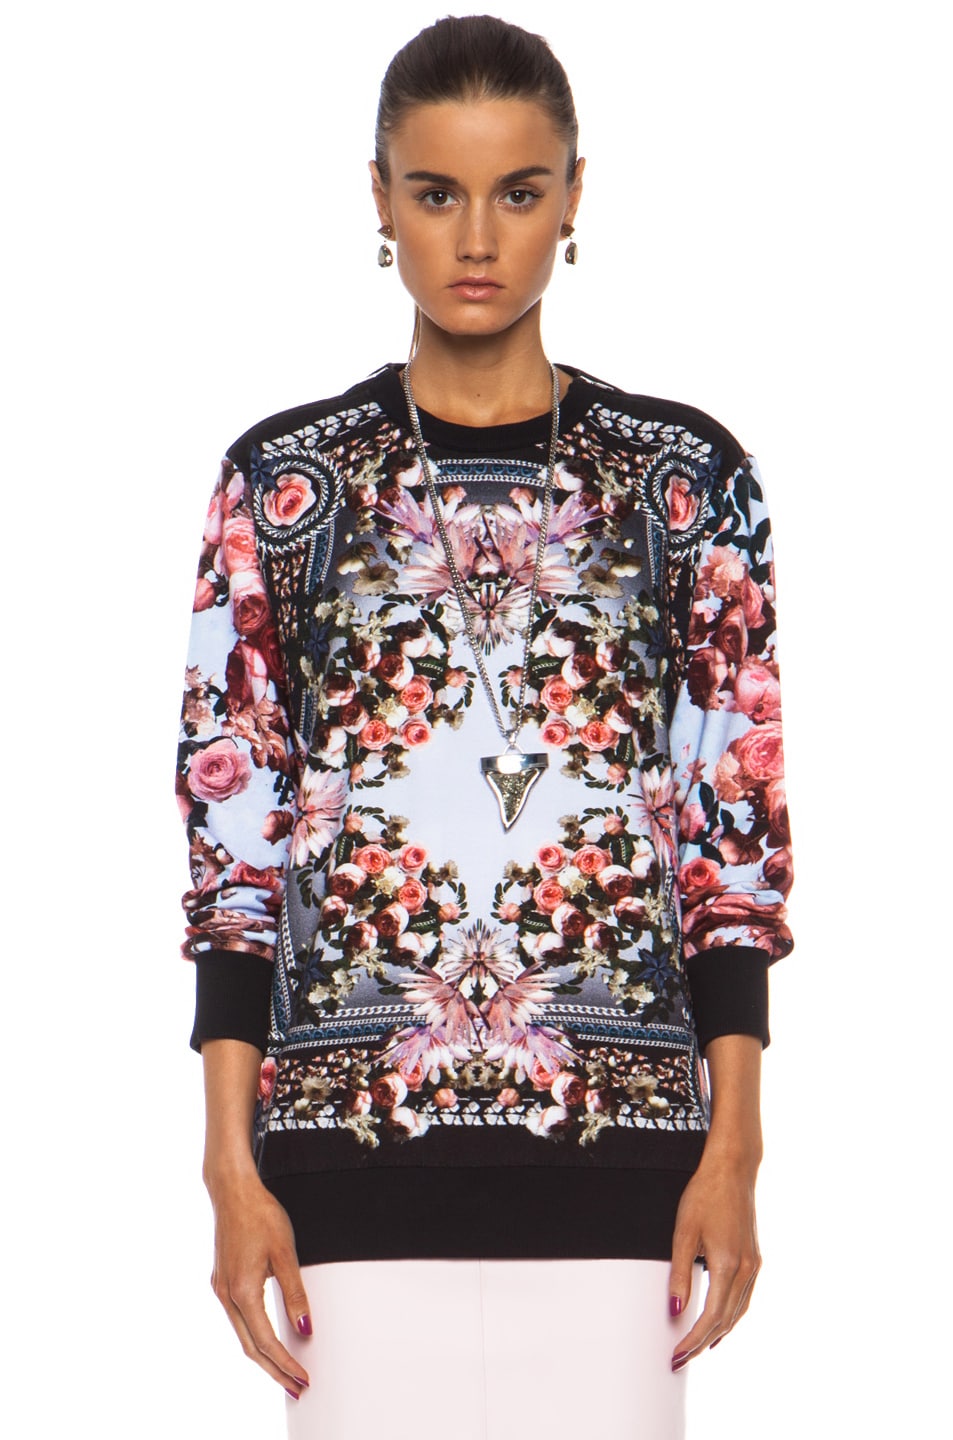 Givenchy Roses and Birds of Paradise Cotton Sweatshirt in Multi | FWRD